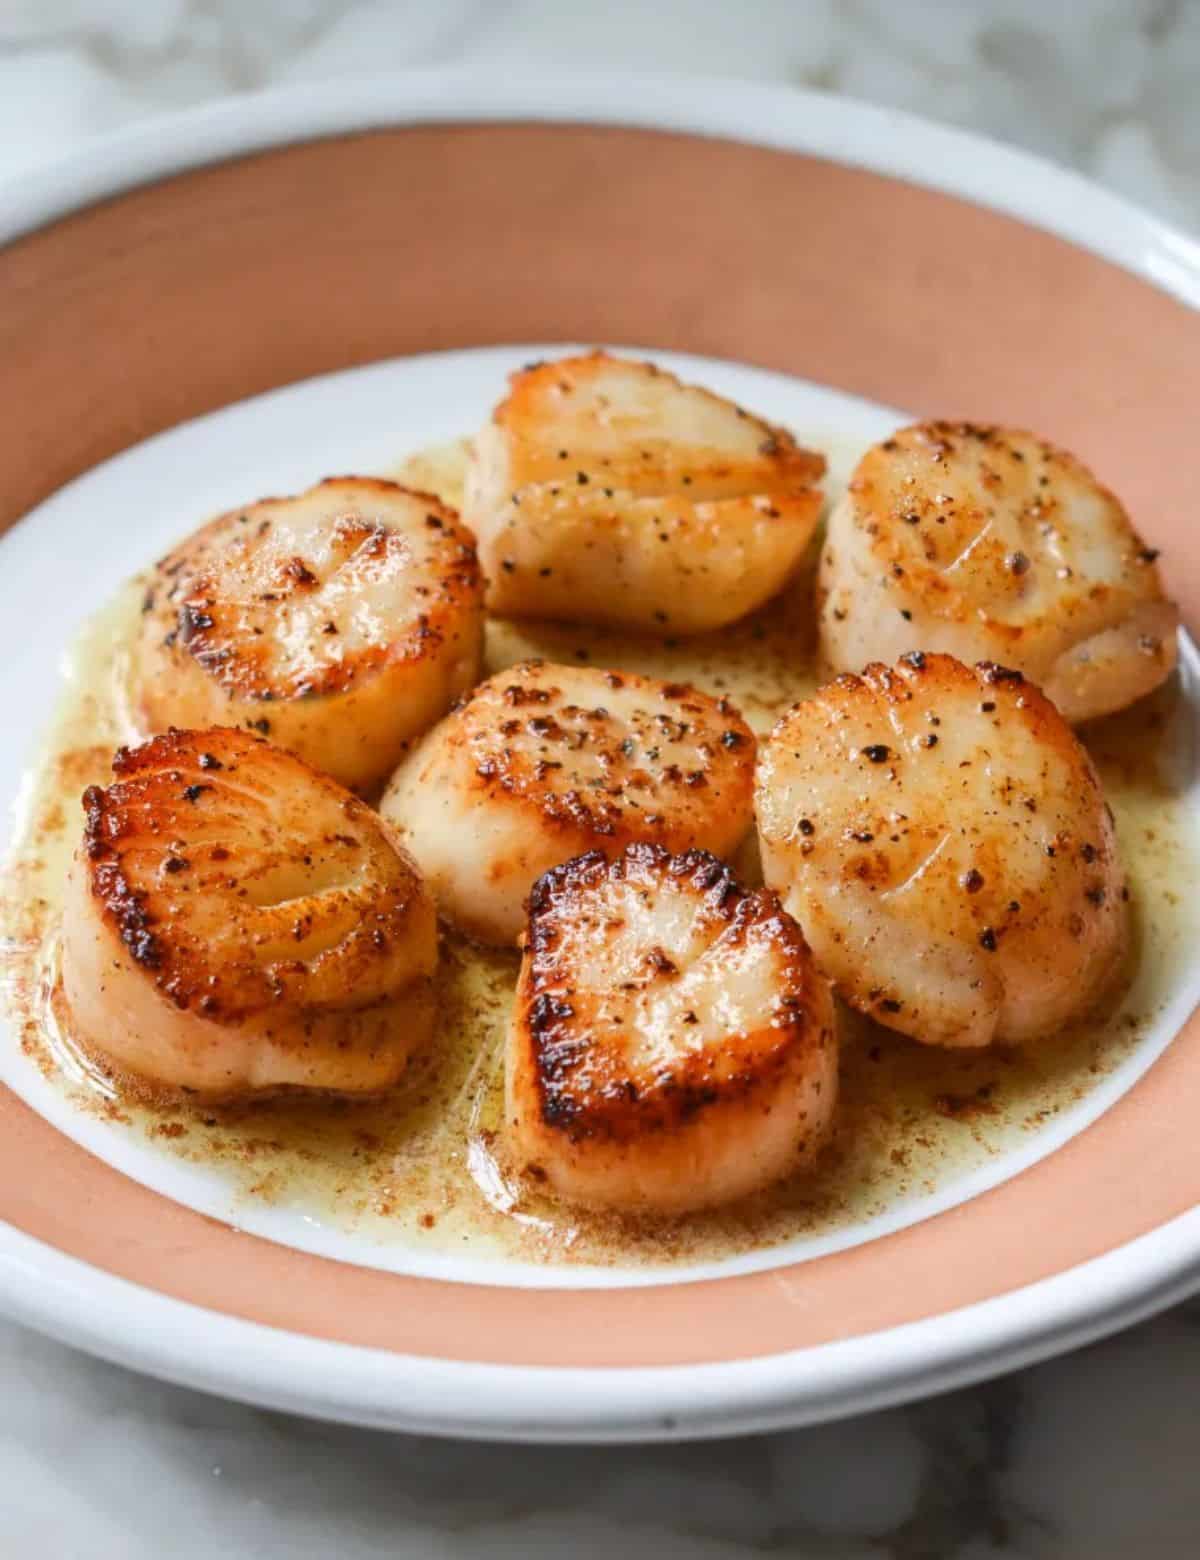 Scrumptious Pan-Seared Scallops with Lemon Butter in a bowl.